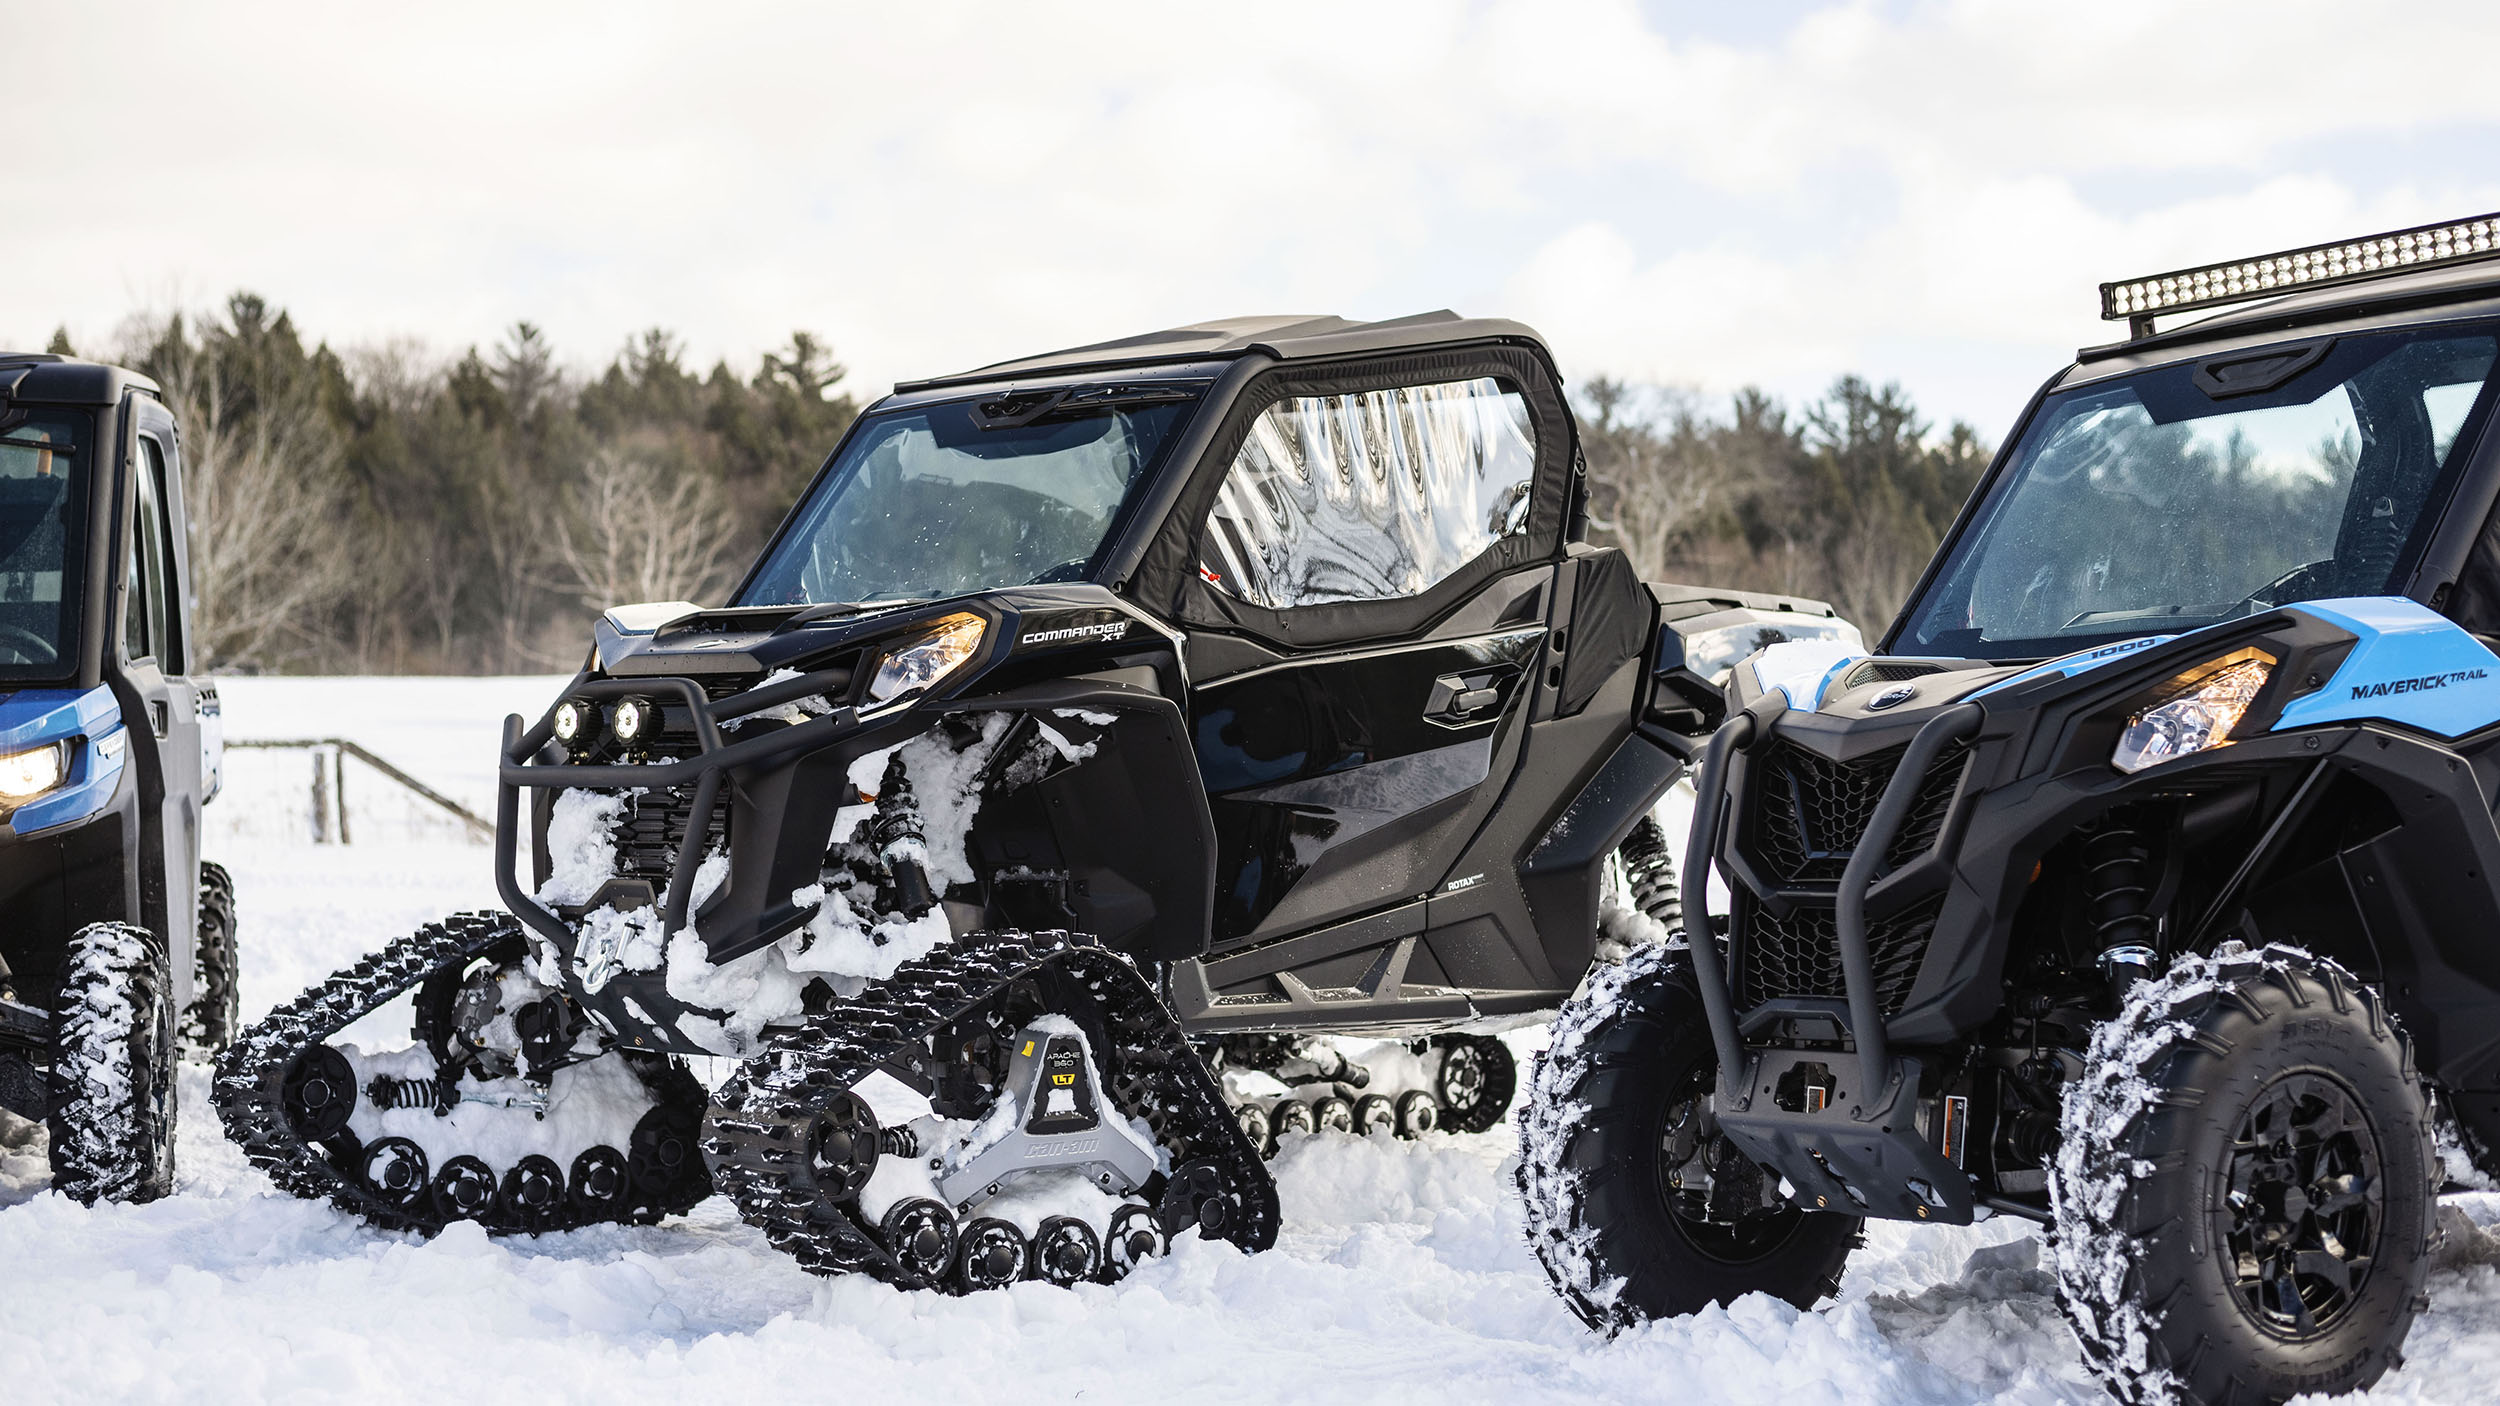 A close view of the Can-Am vehicles